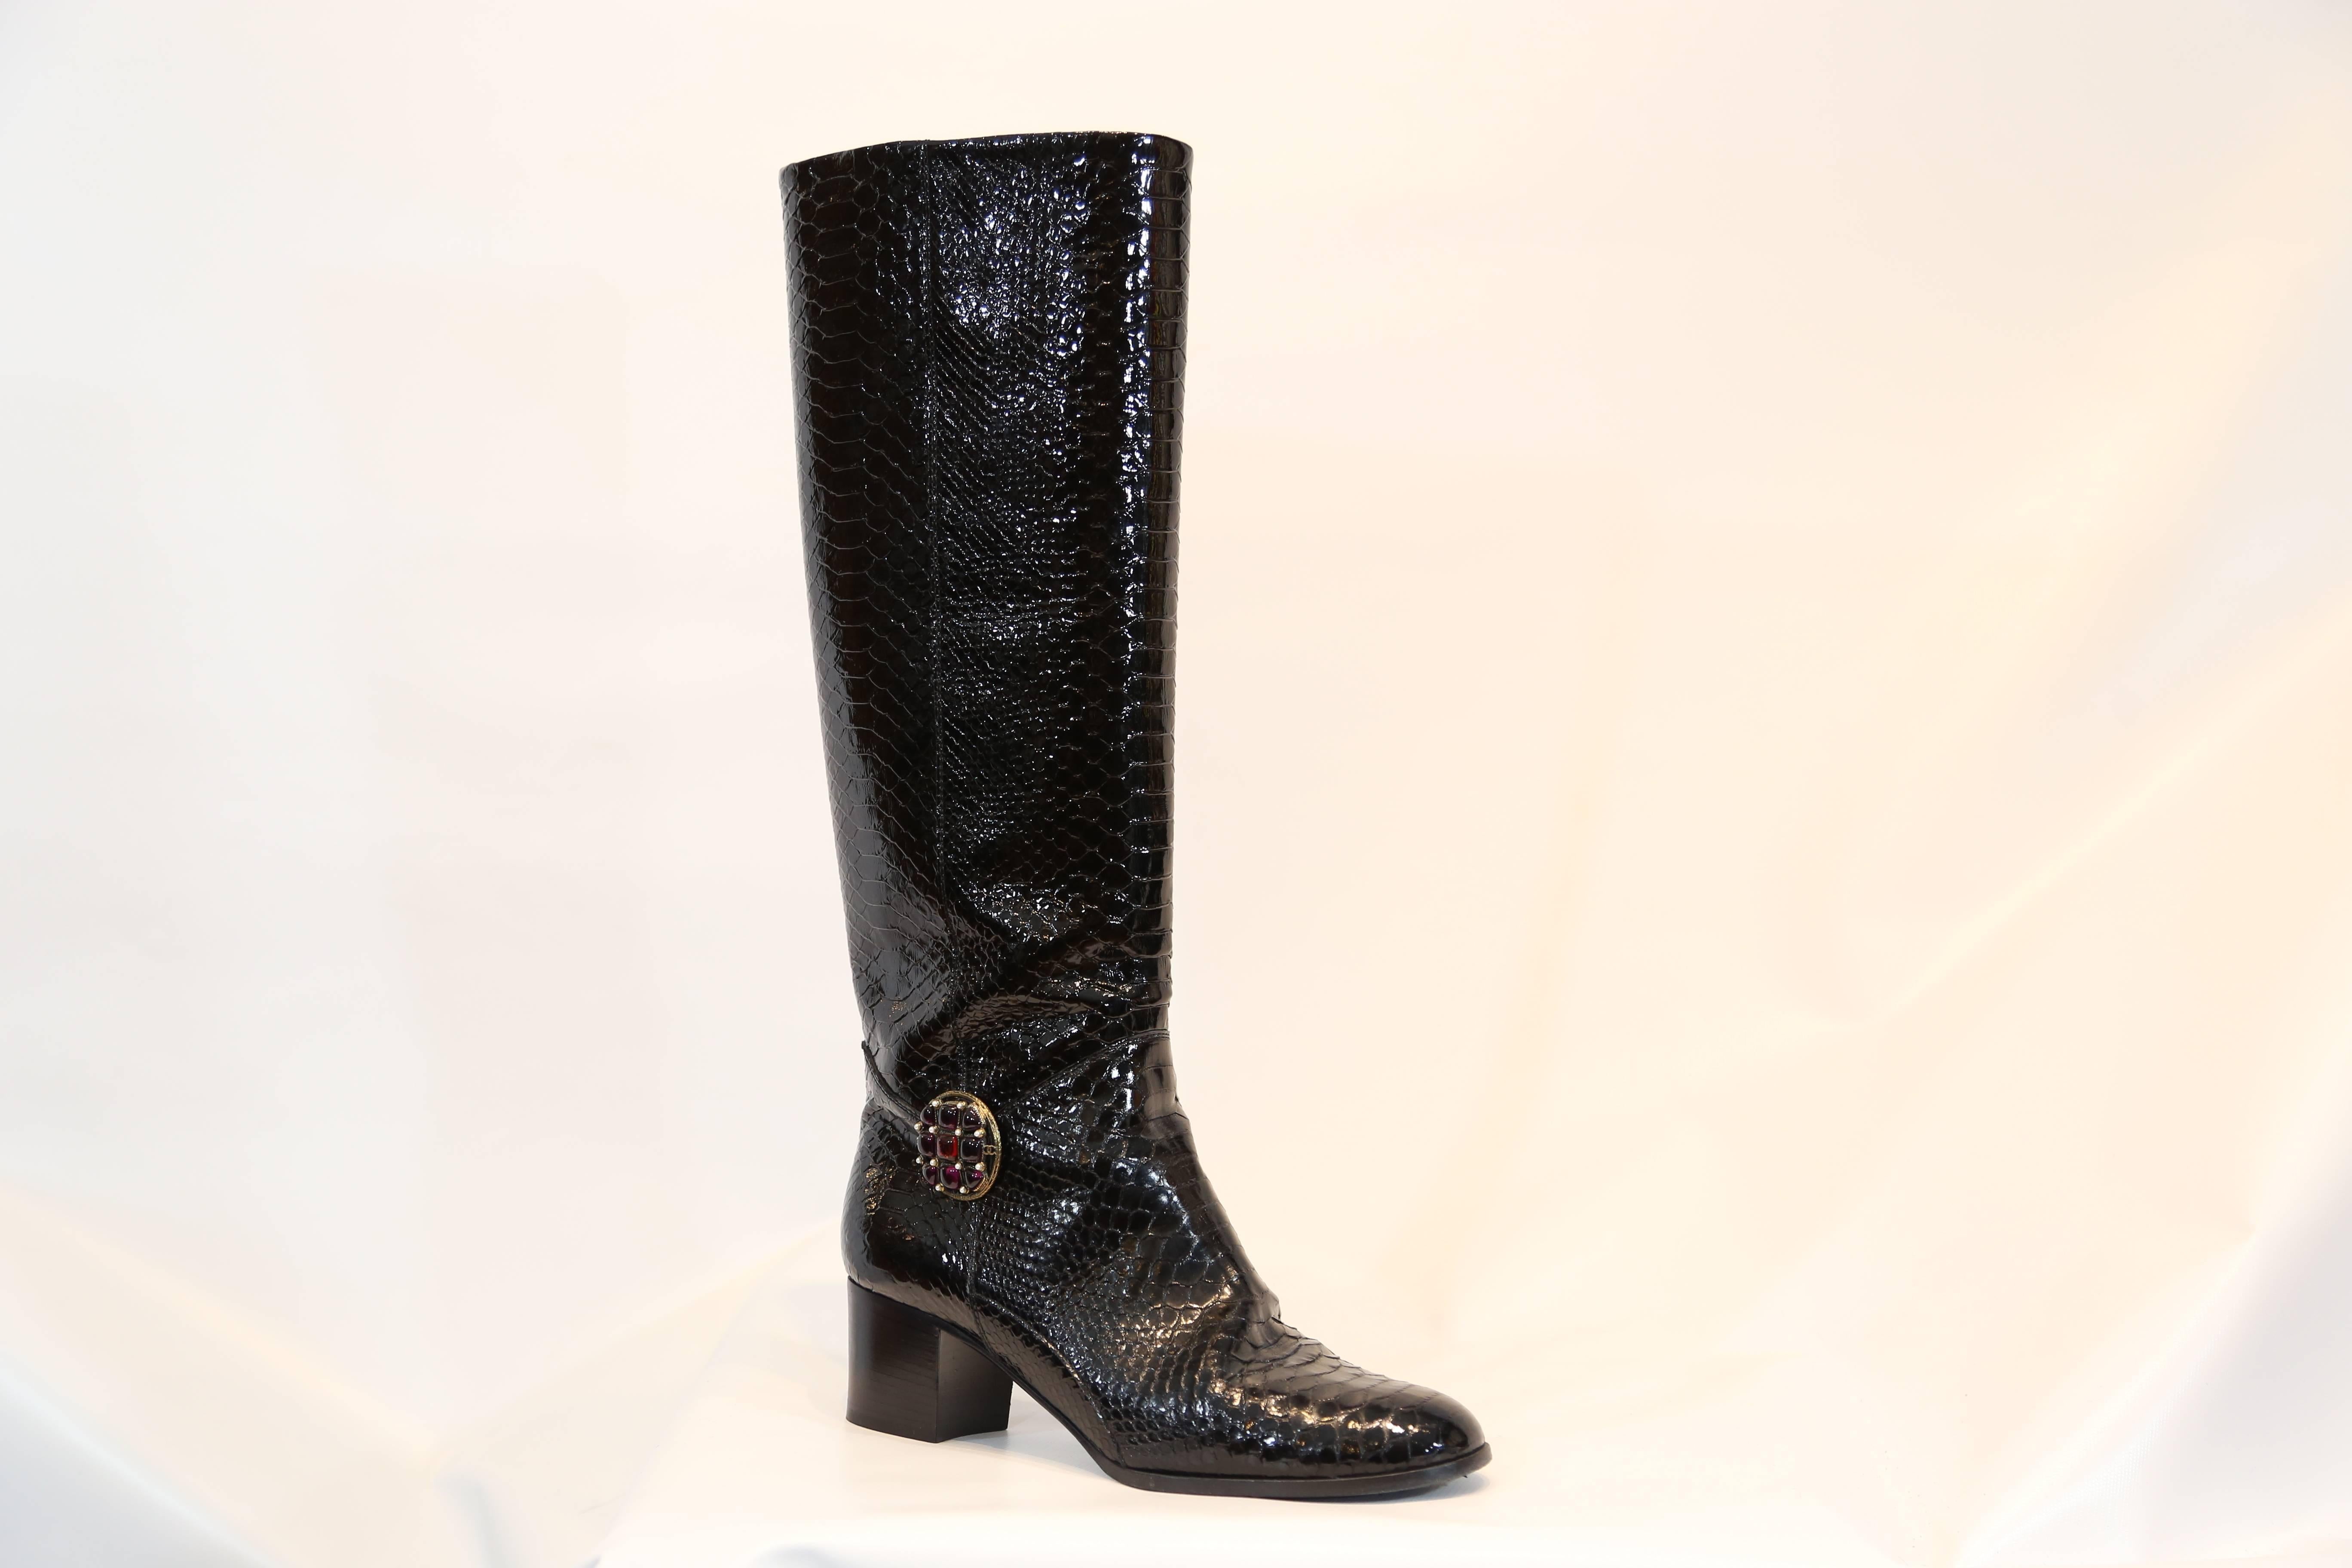 Chanel black python embossed patent leather boots. Jeweled detail on ankle. Knee high boots. 